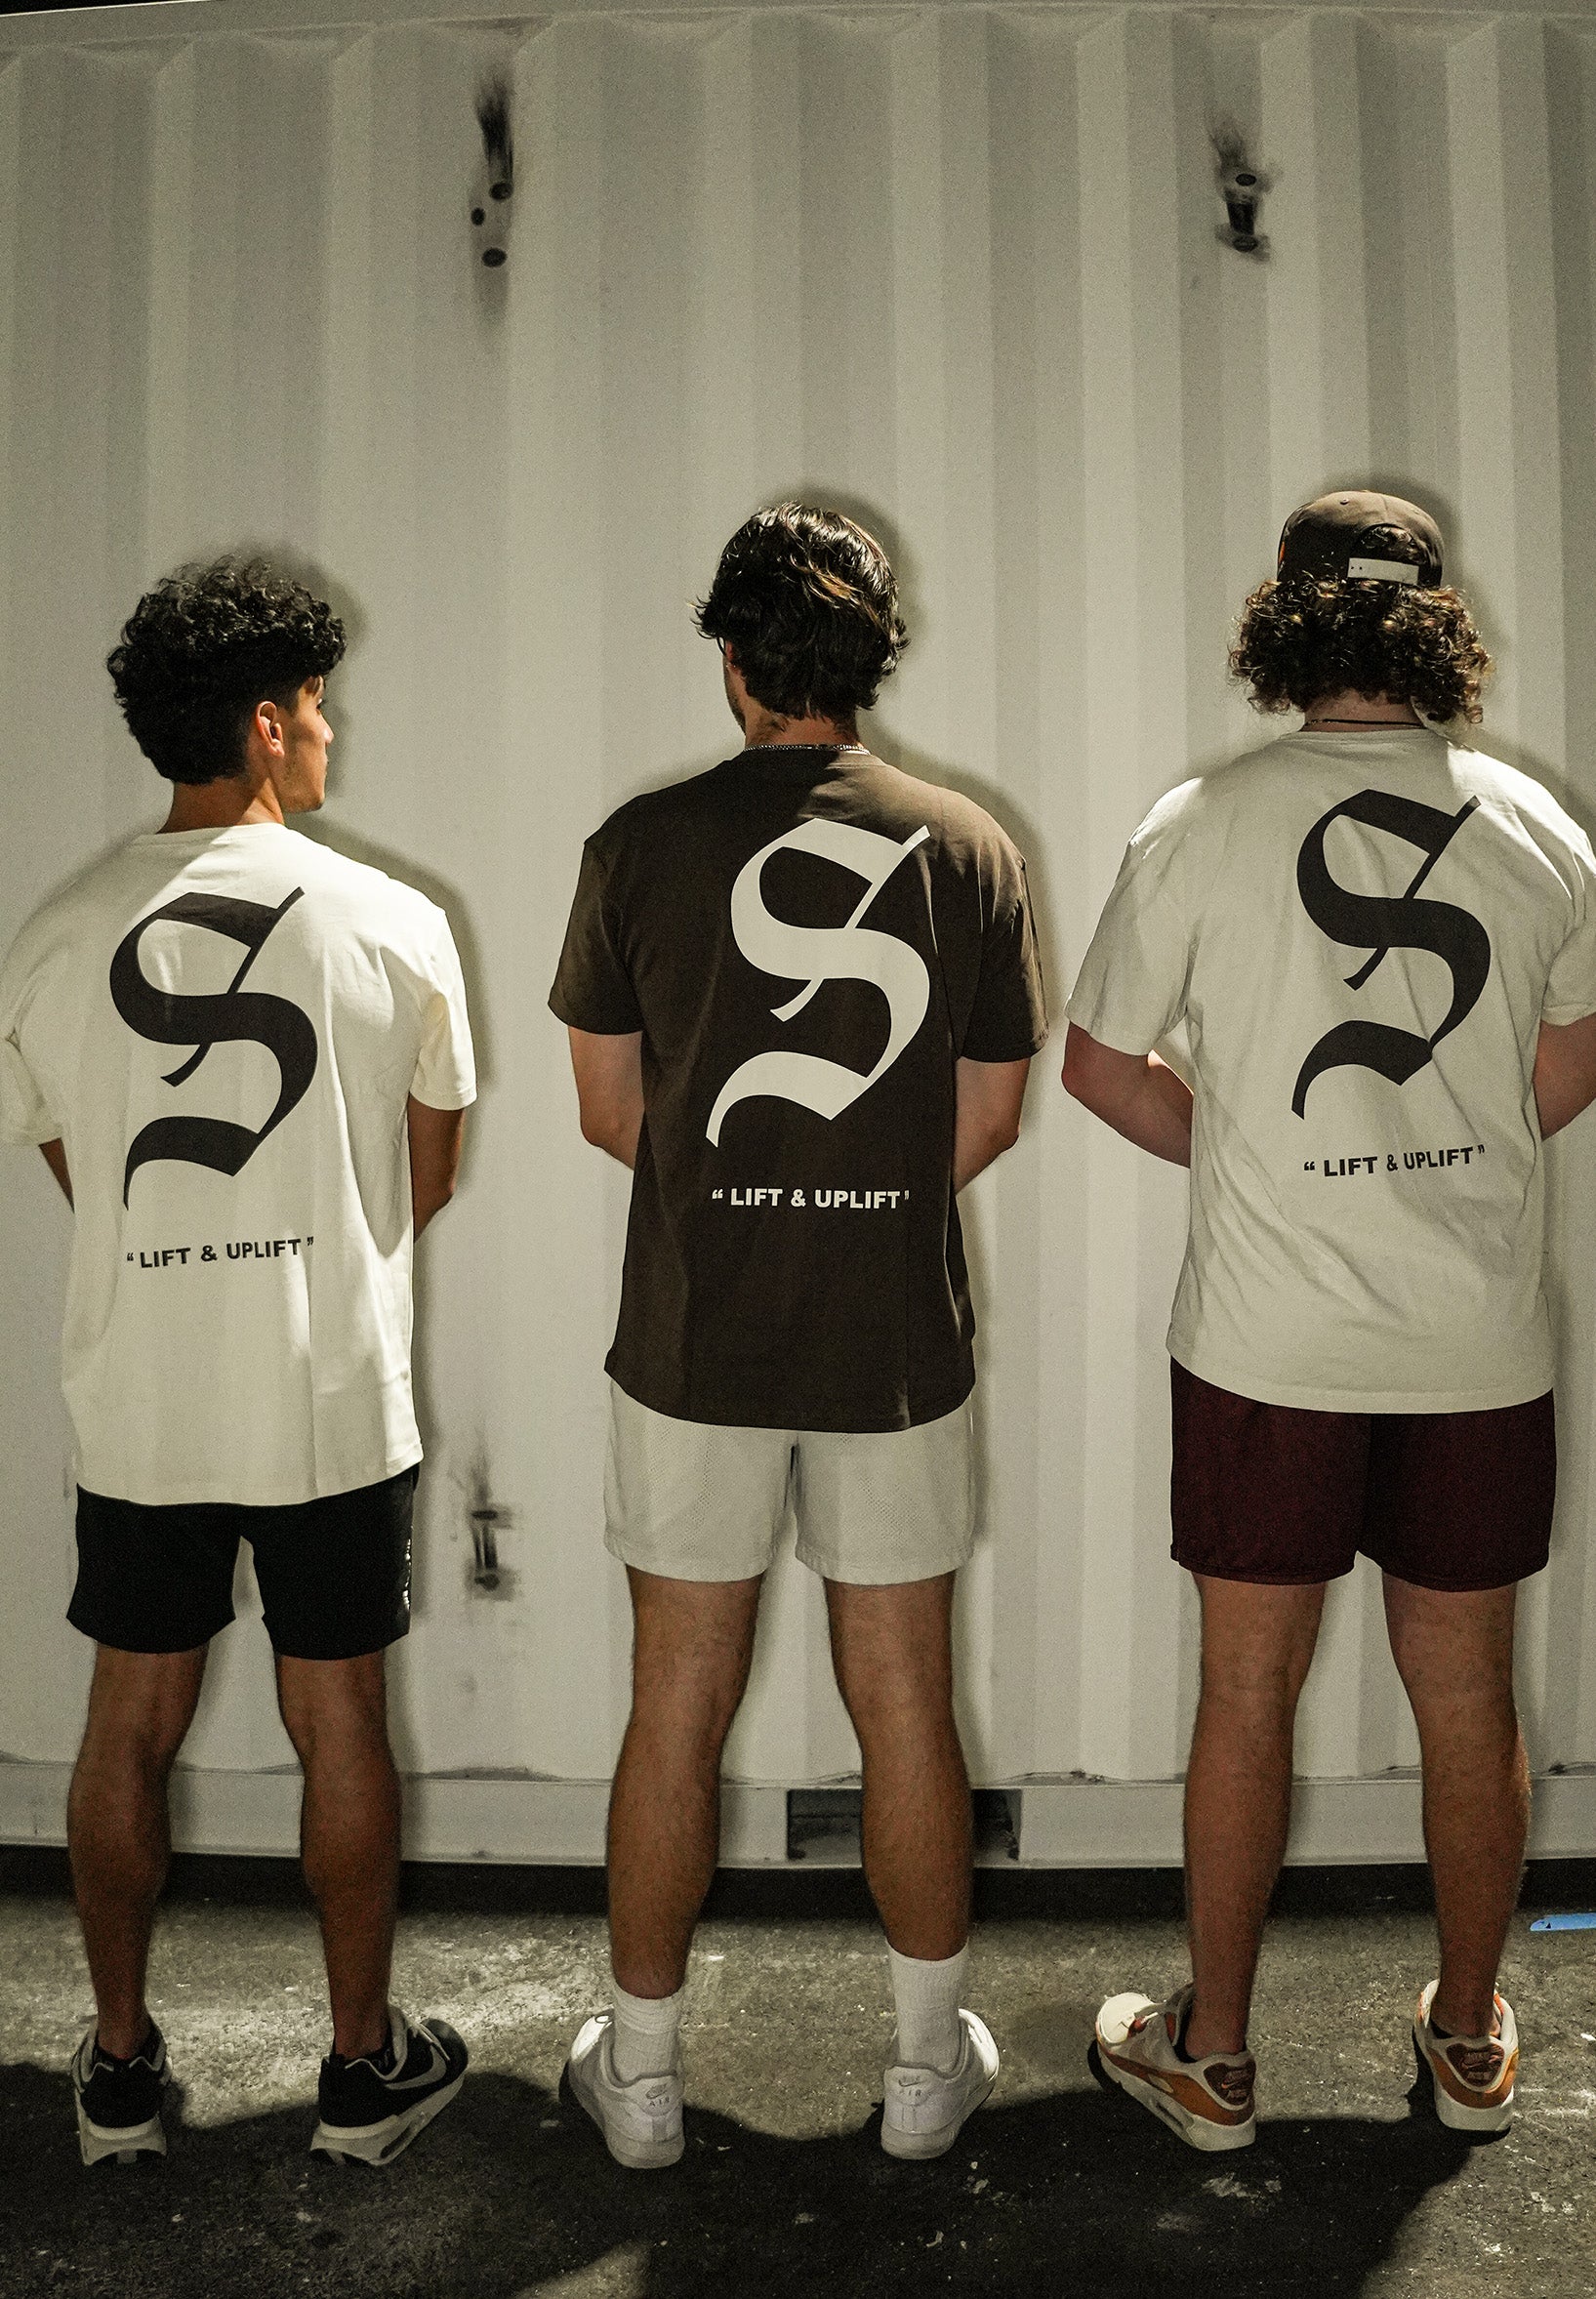 – THE LIFTING SOCIETY BLACKLETTER TEE